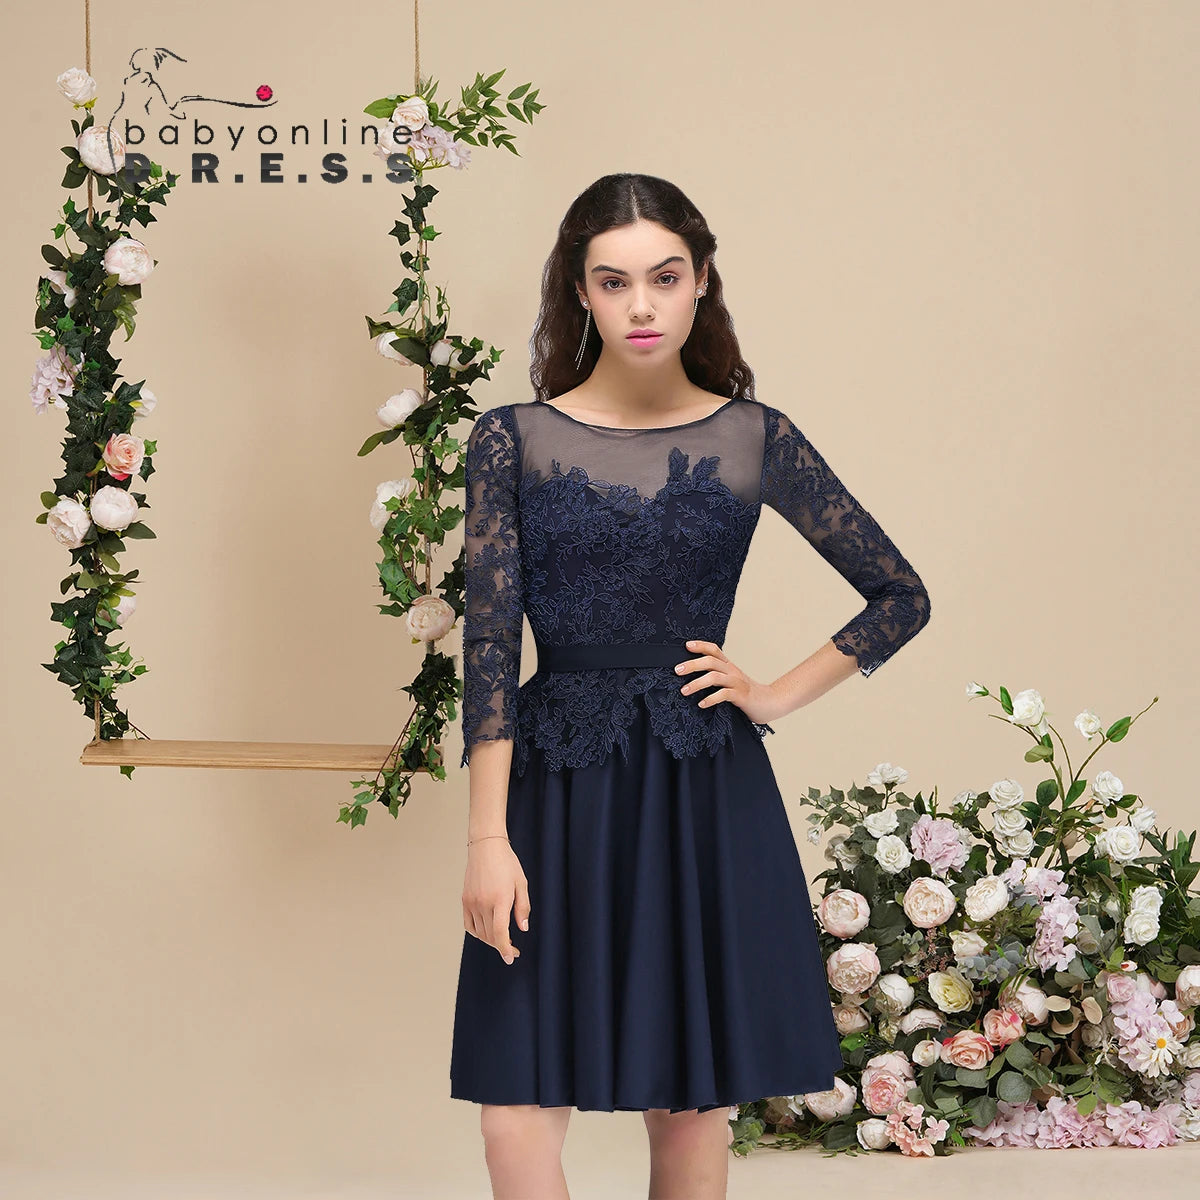 A-line Scoop Long Sleeves Lace Homecoming Dress Chiffon A Line Skirt Short Knee-Length Formal Party Gown Prom